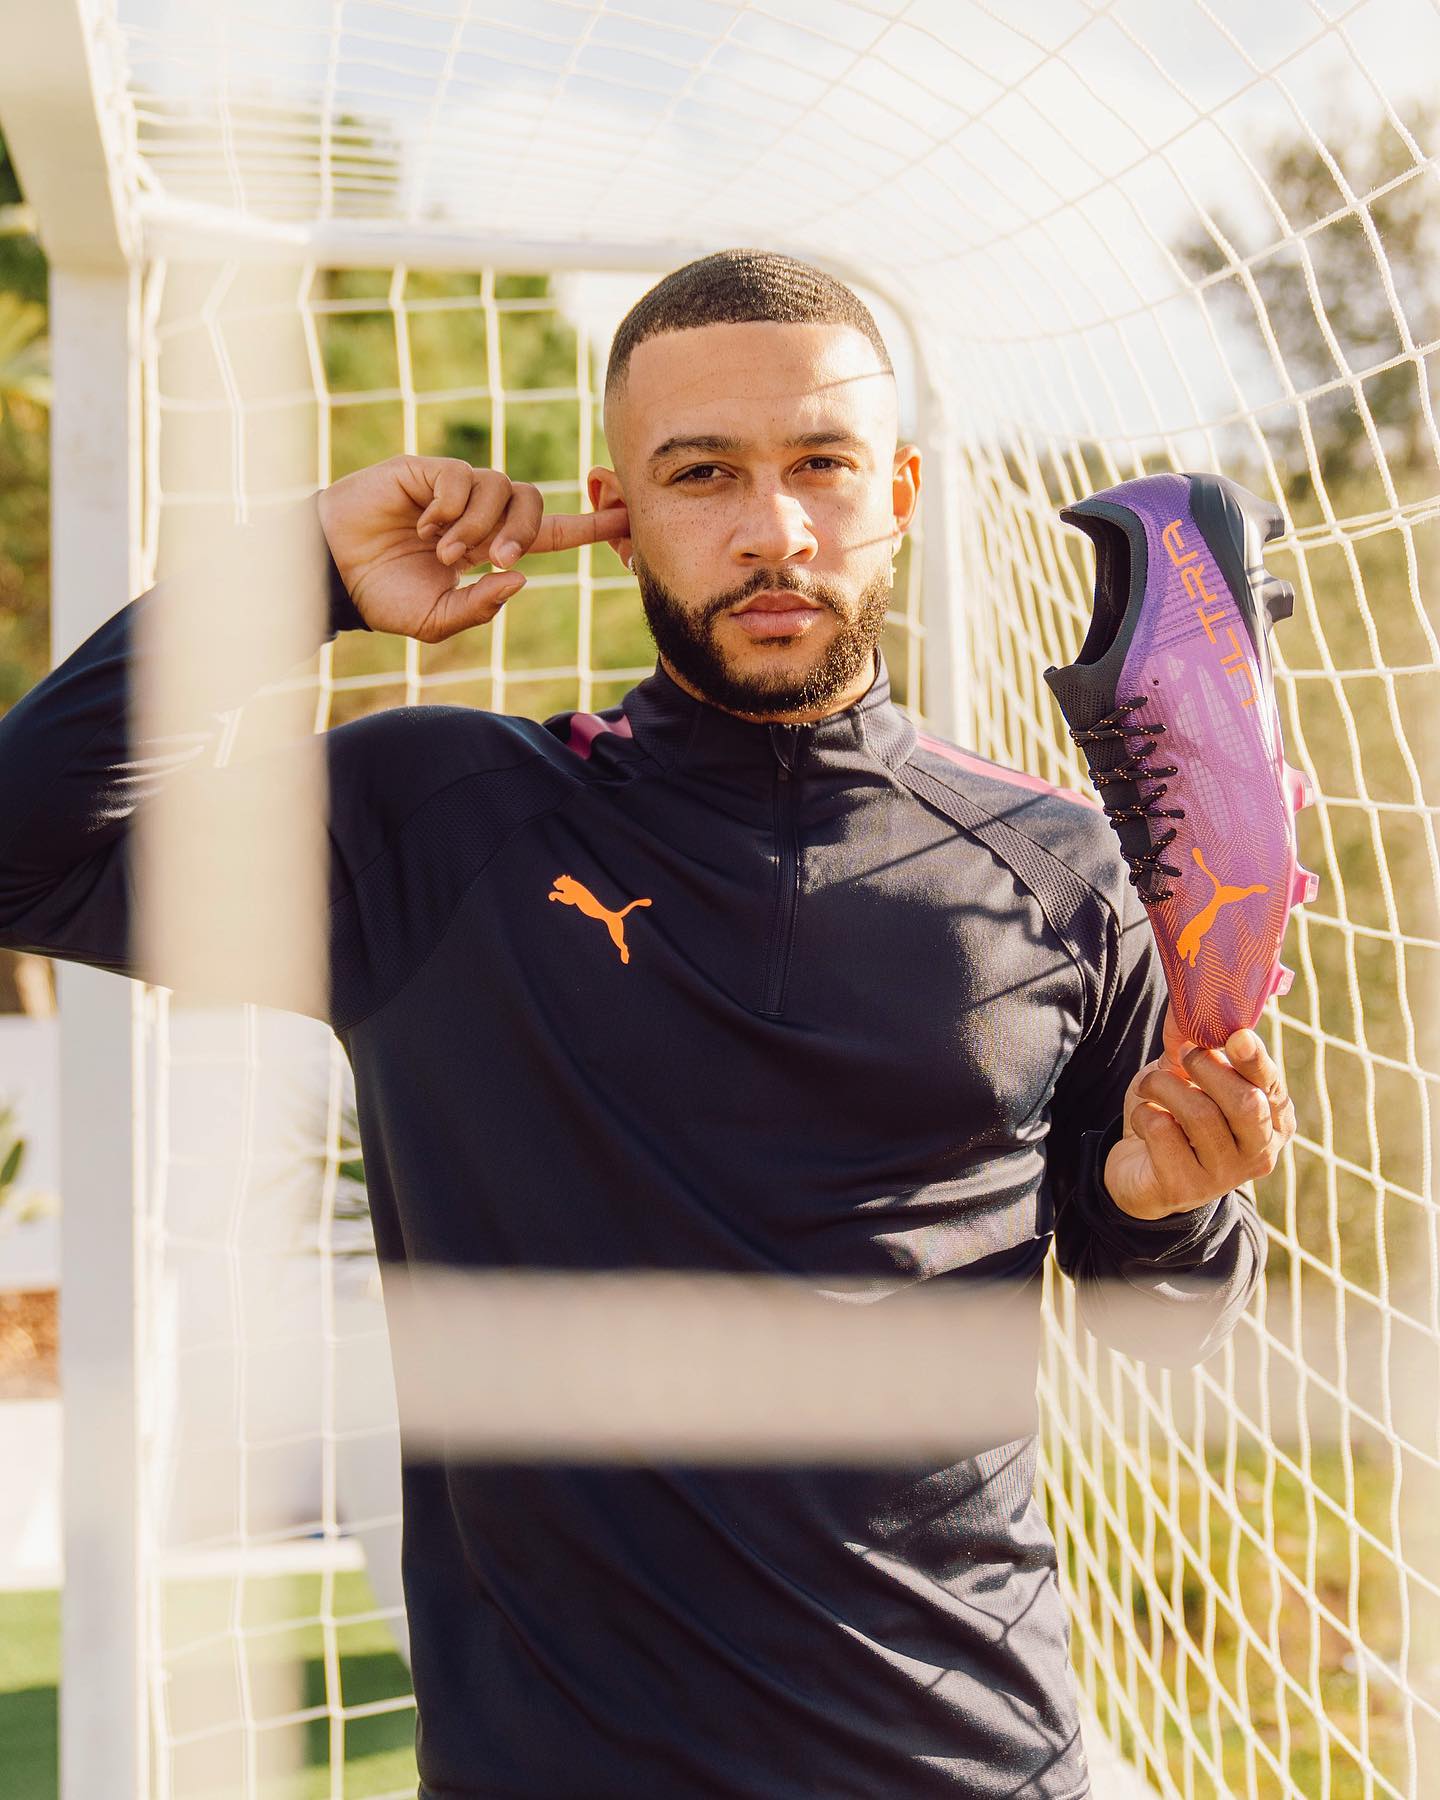 CRESTA negotiated and closed global partnership for Memphis Depay with Puma